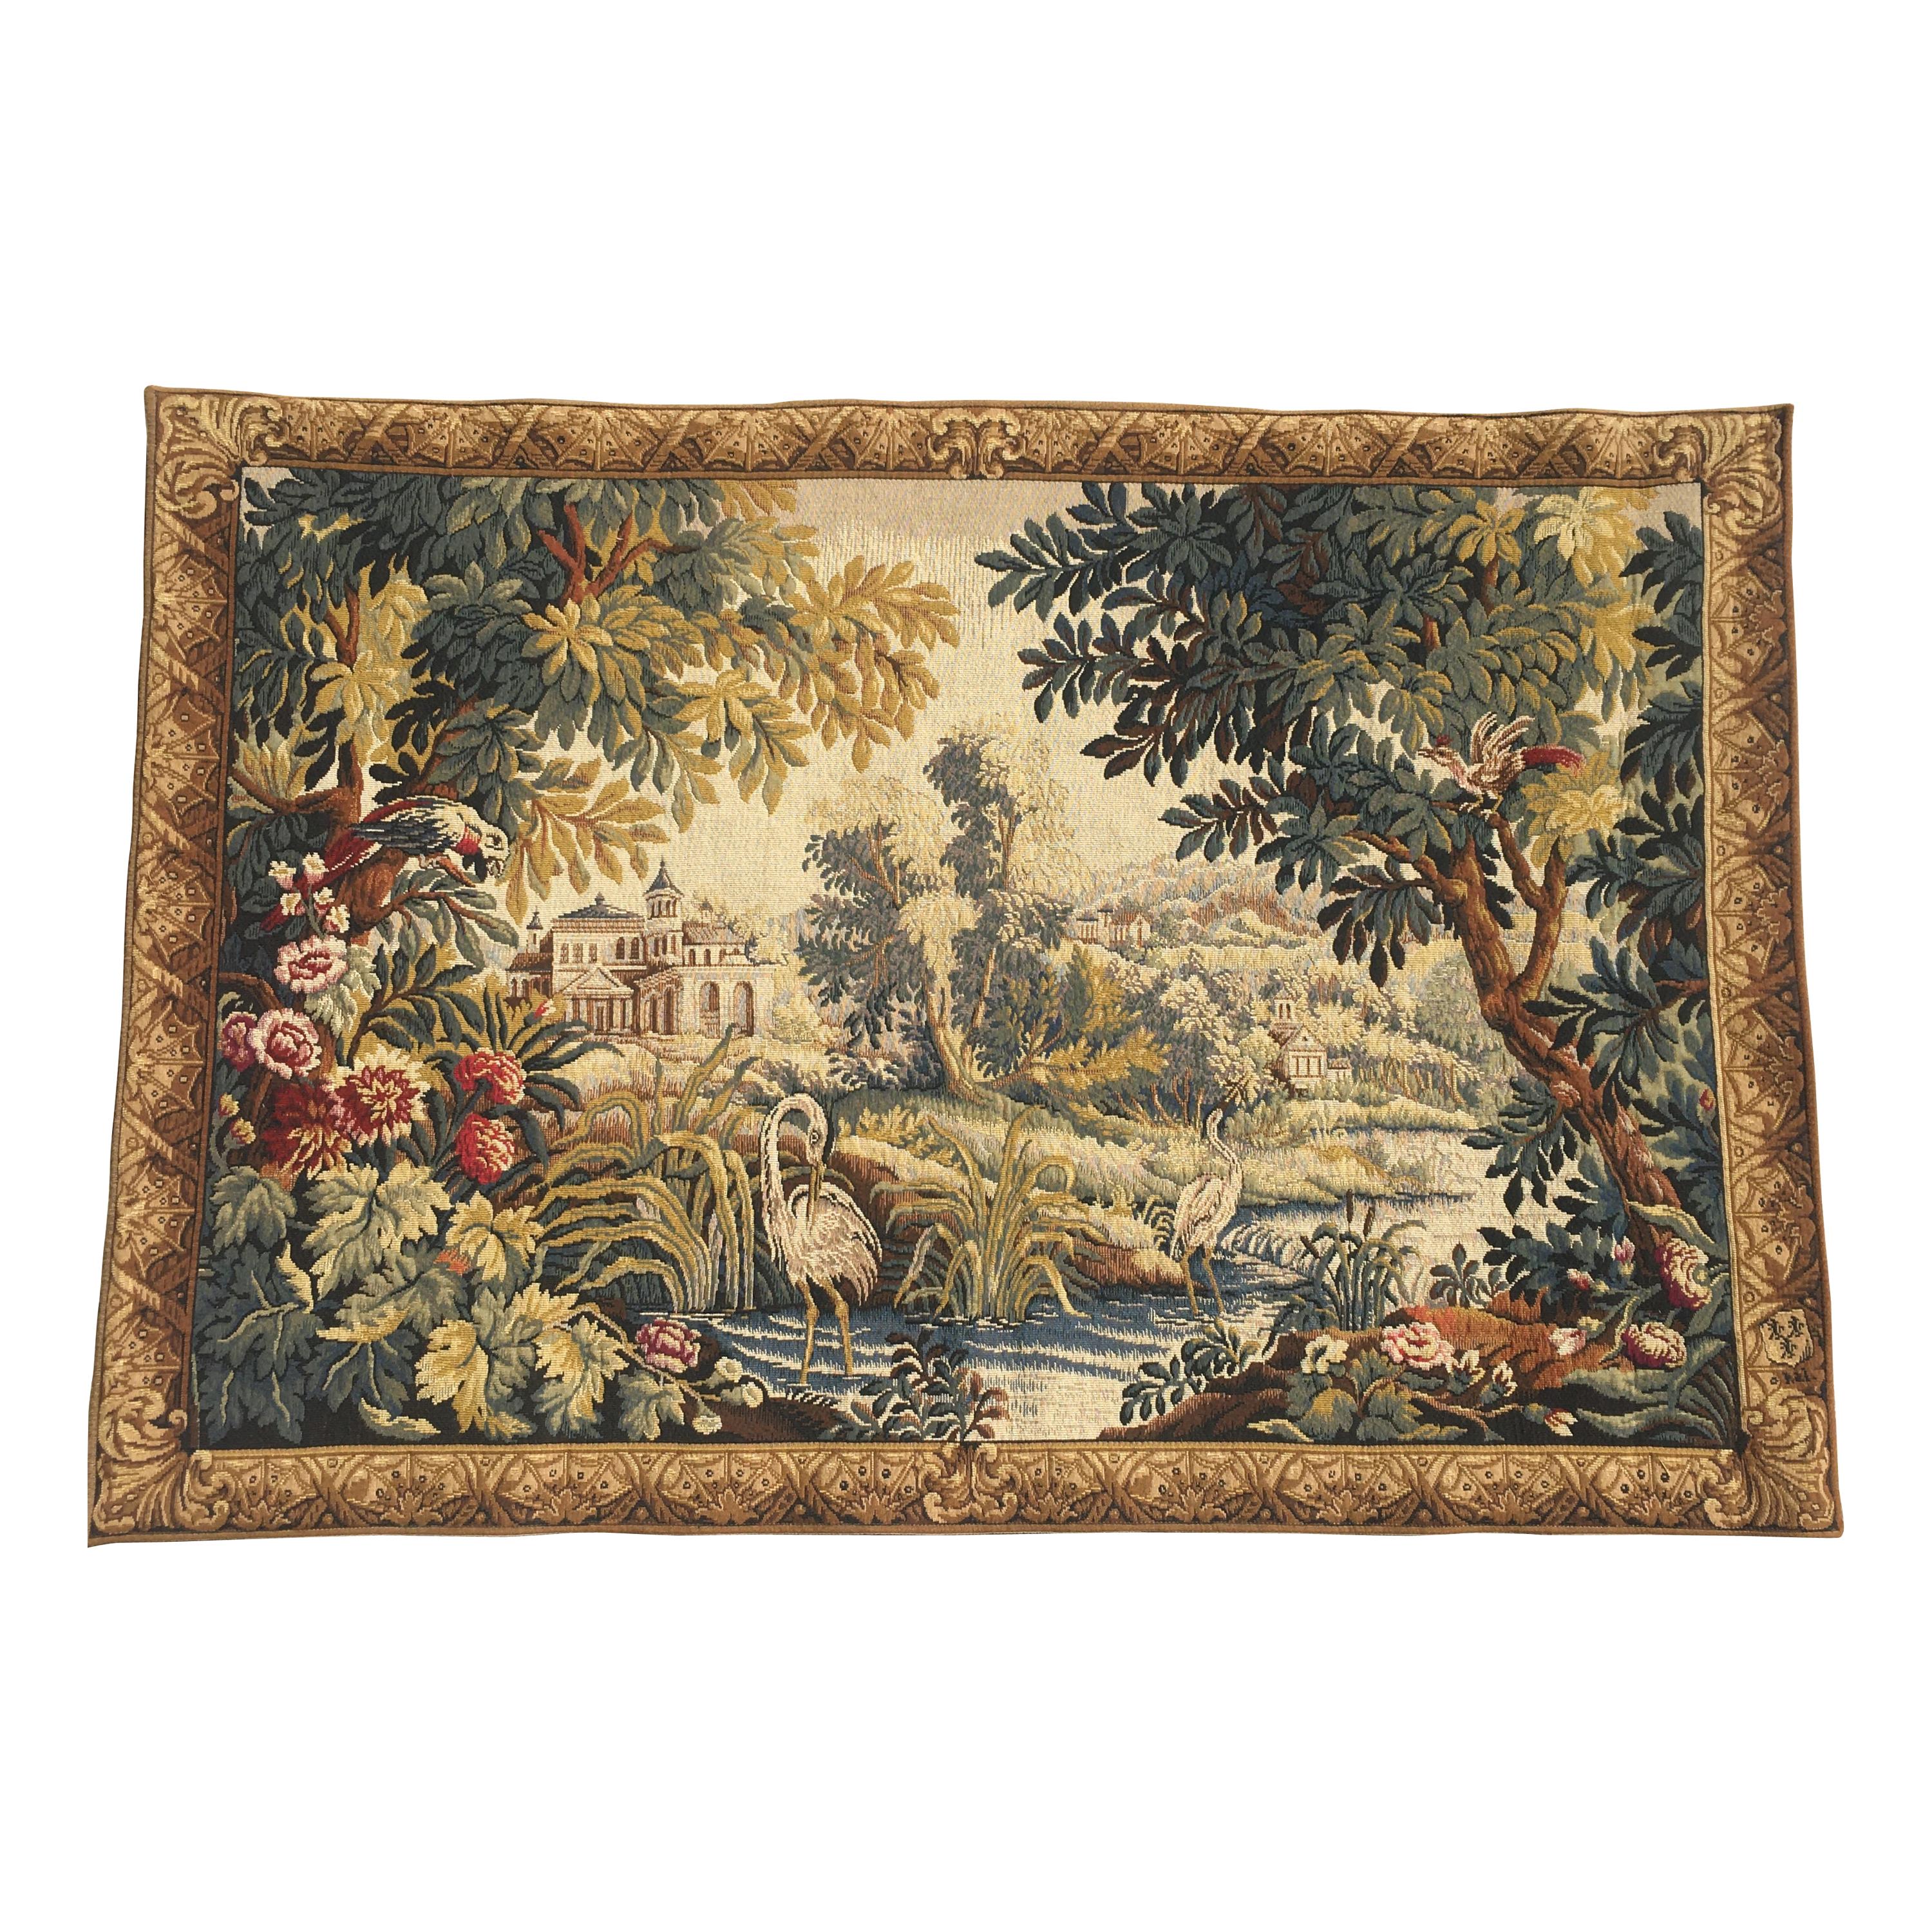 French Aubusson Style Tapestry with Castles, River, Ducks, and Foliage